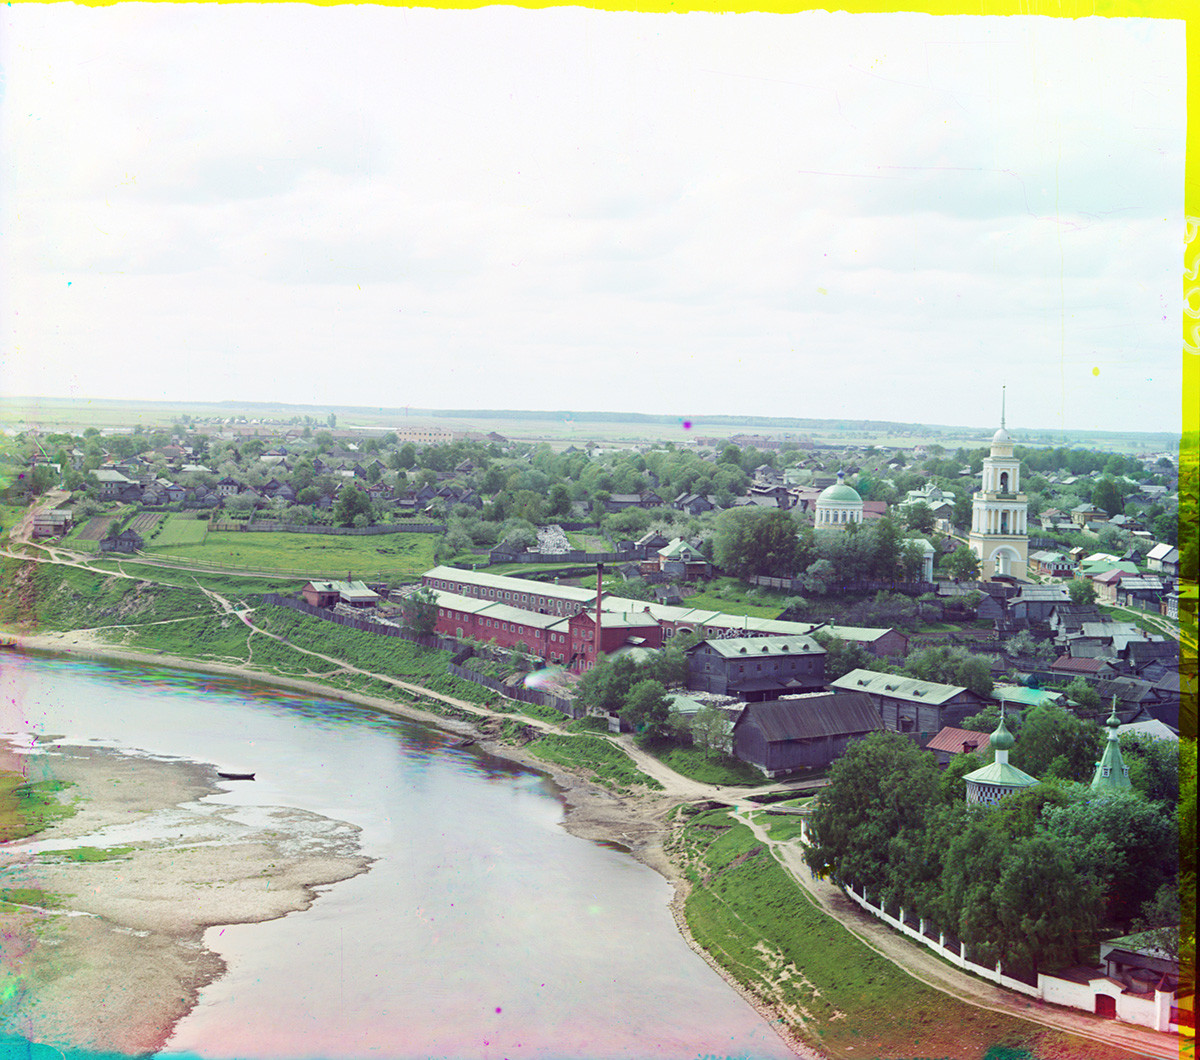 Rzhev. View of Prince Dmitry Side across Volga River. Right: Cathedral of the Okovetsky Icon. Summer 1910.